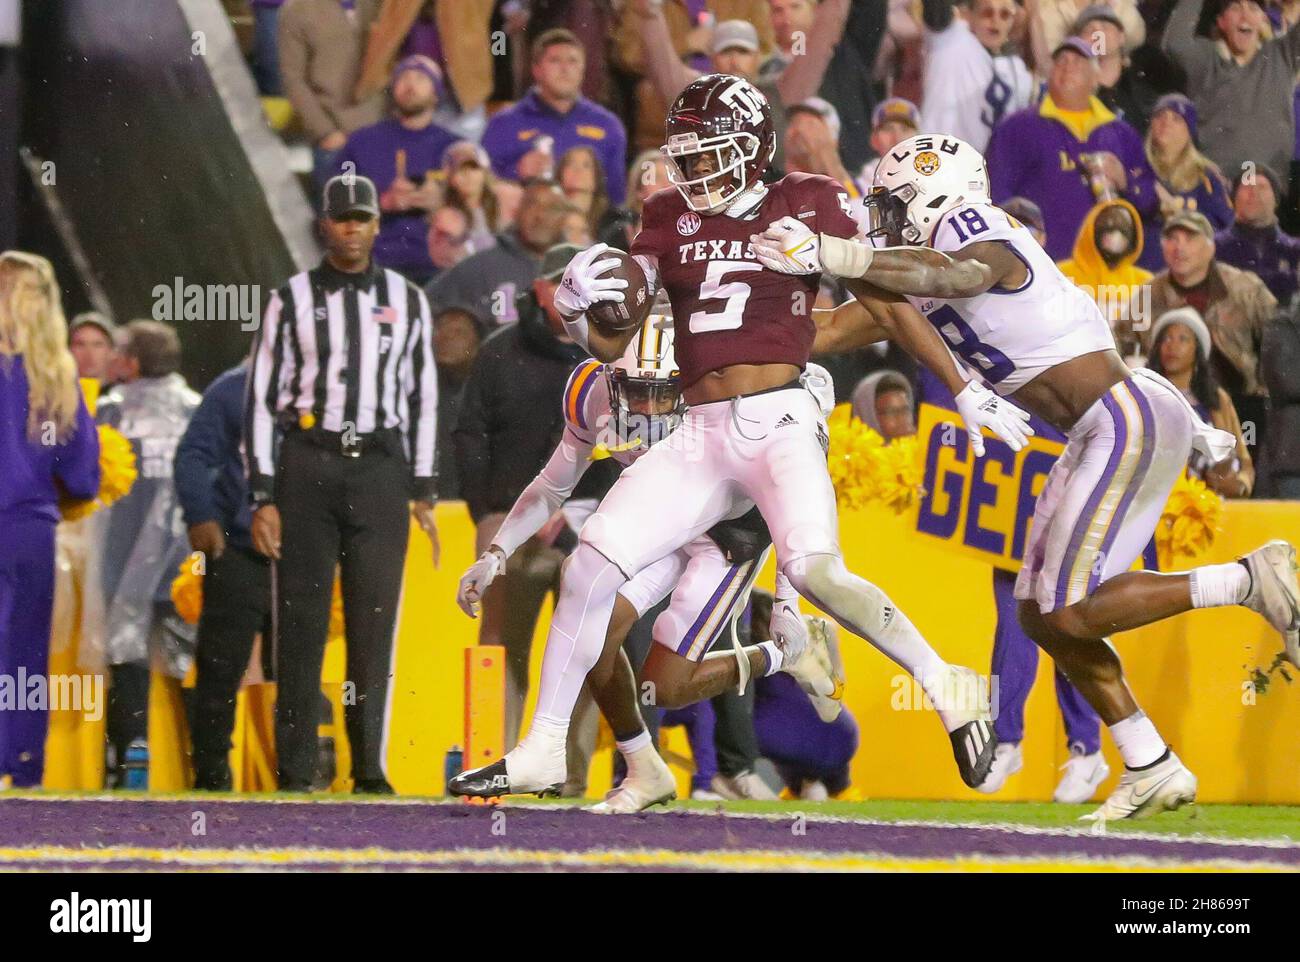 Baton Rouge, LA, USA. 27th Nov, 2021. Texas A&M's Jalen Preston #5 fights off LSU's Damone Clark #18 to score a touchdown during the NCAA football game between the LSU Tigers and the Texas A&M Aggies at Tiger Stadium in Baton Rouge, LA. Kyle Okita/CSM/Alamy Live News Stock Photo